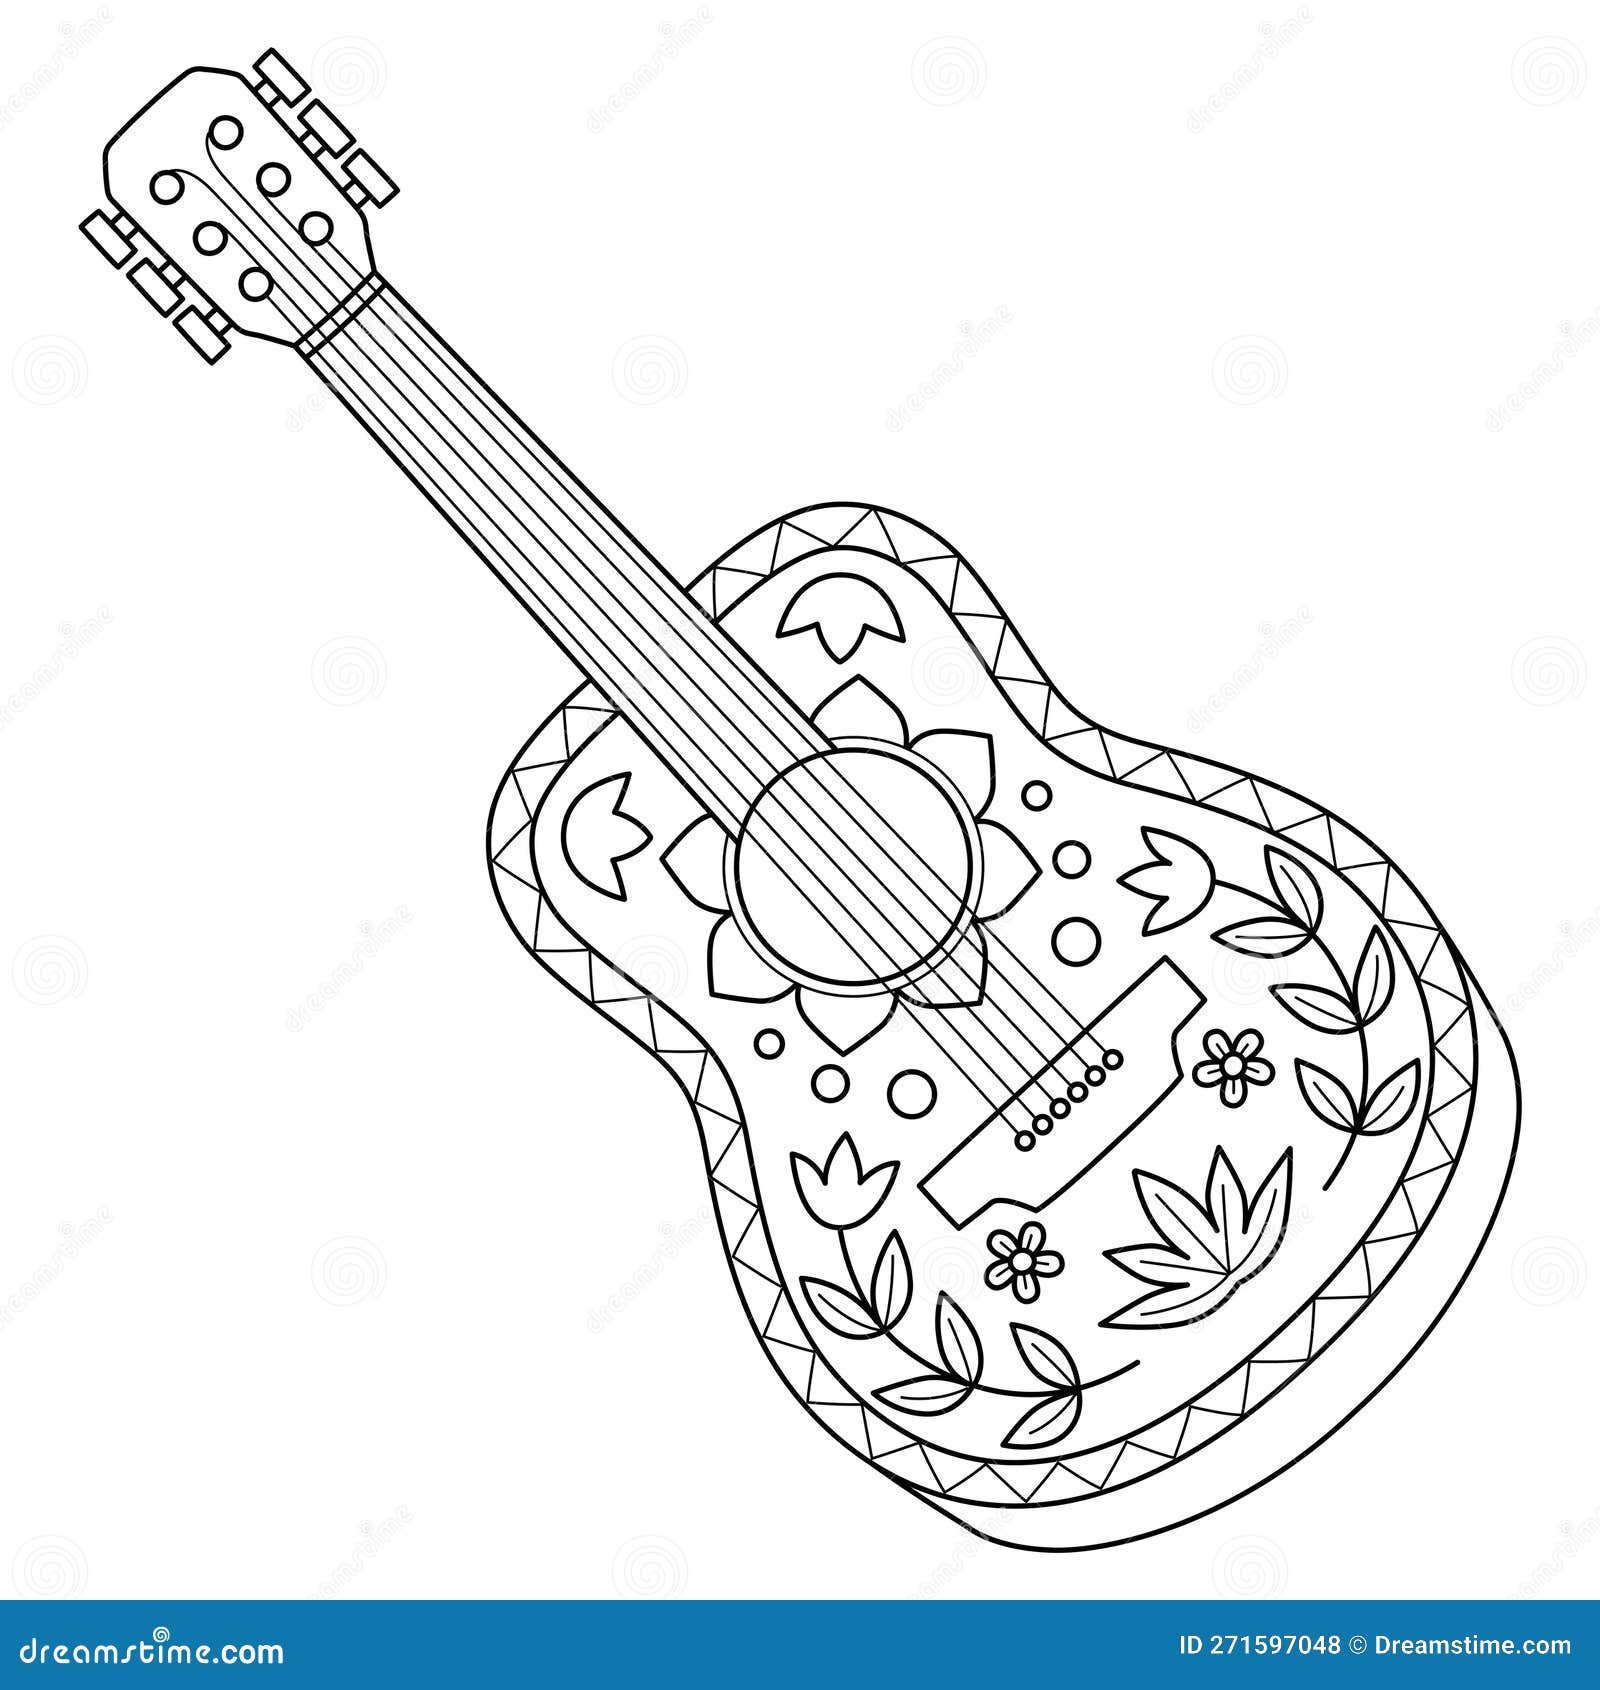 Guitar isolated coloring page for kids stock vector